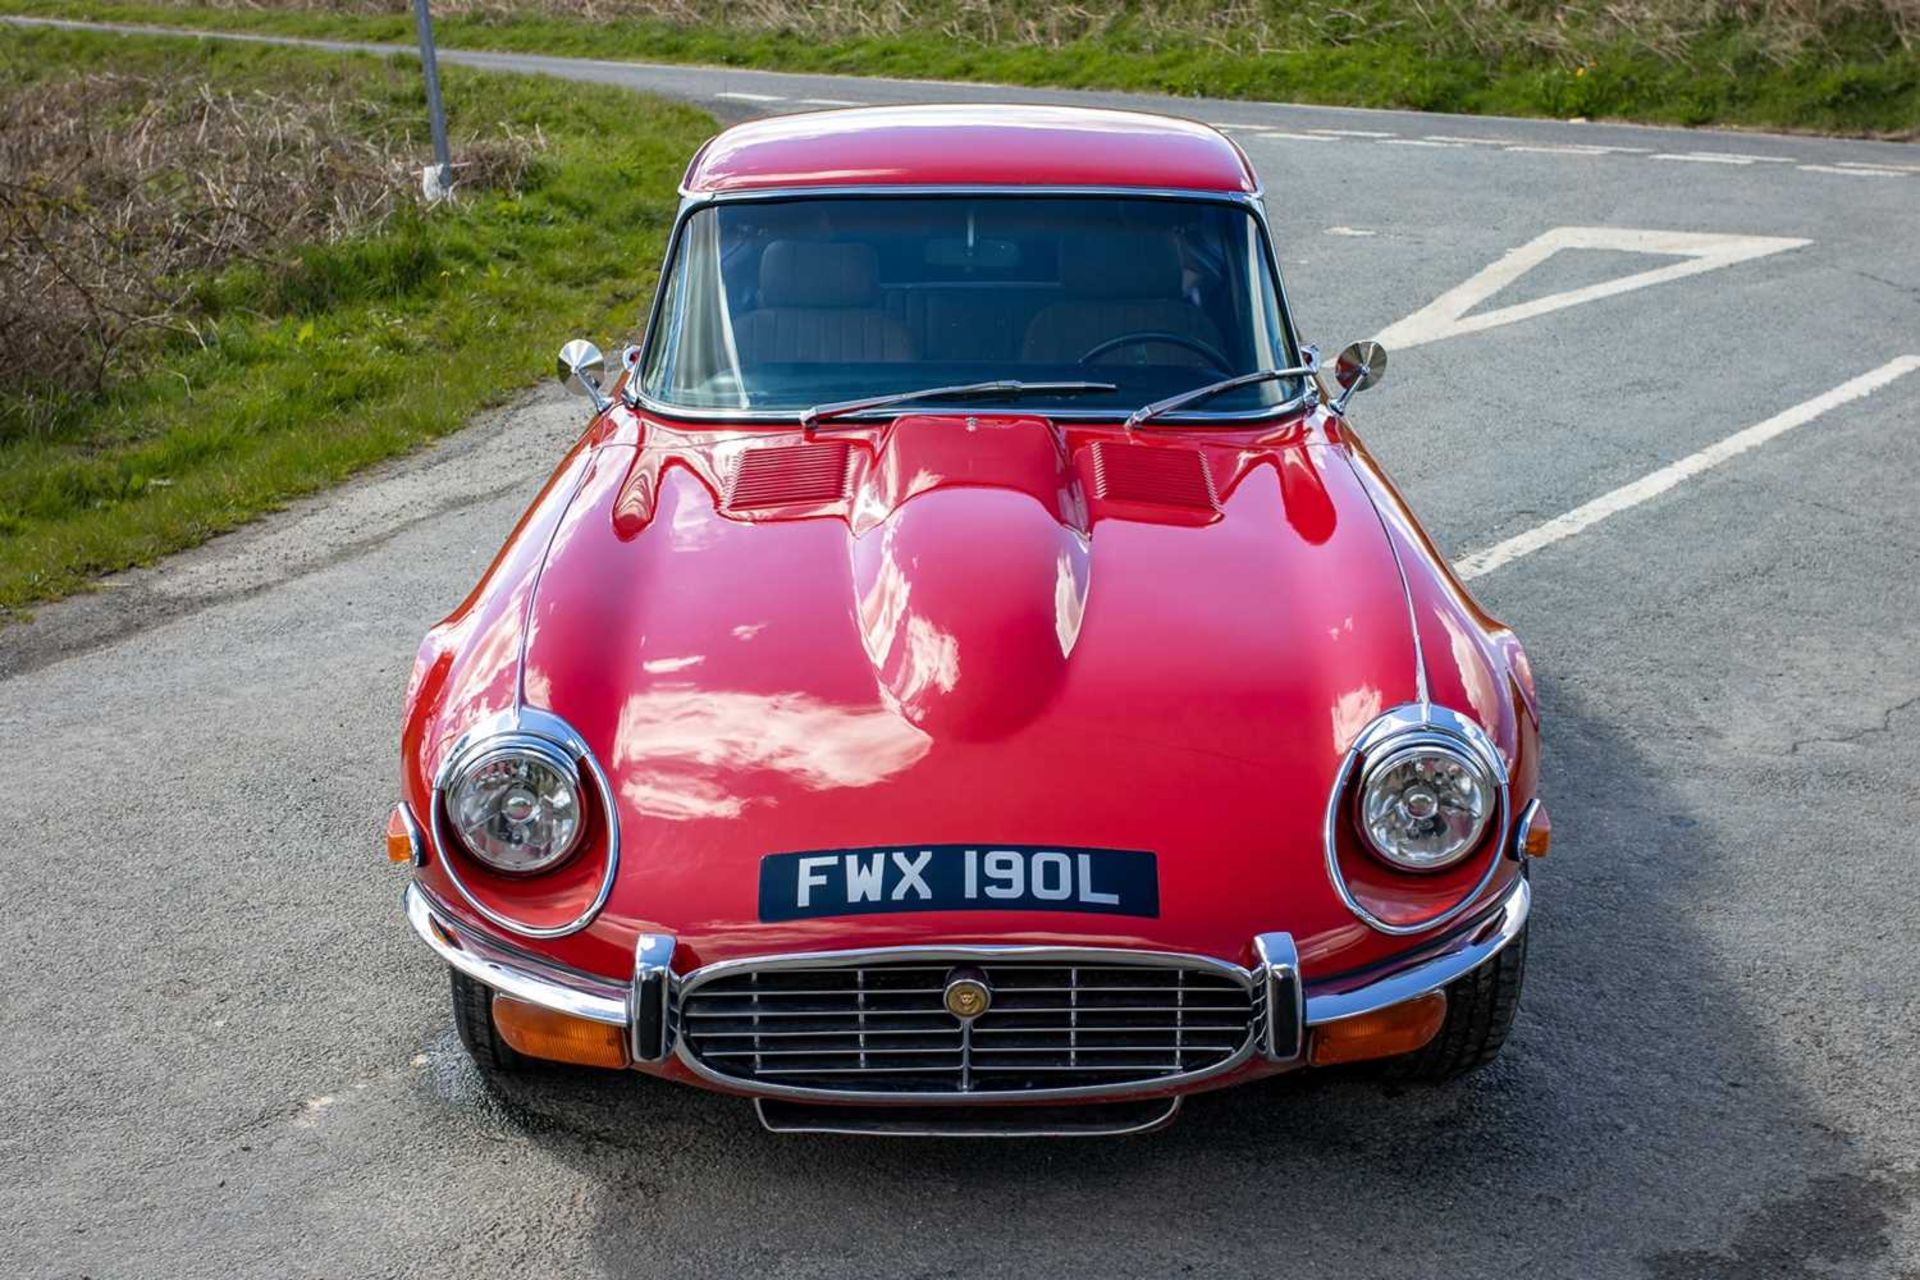 1973 Jaguar E-Type Coupe 5.3 V12 Three owners from new - Image 9 of 79